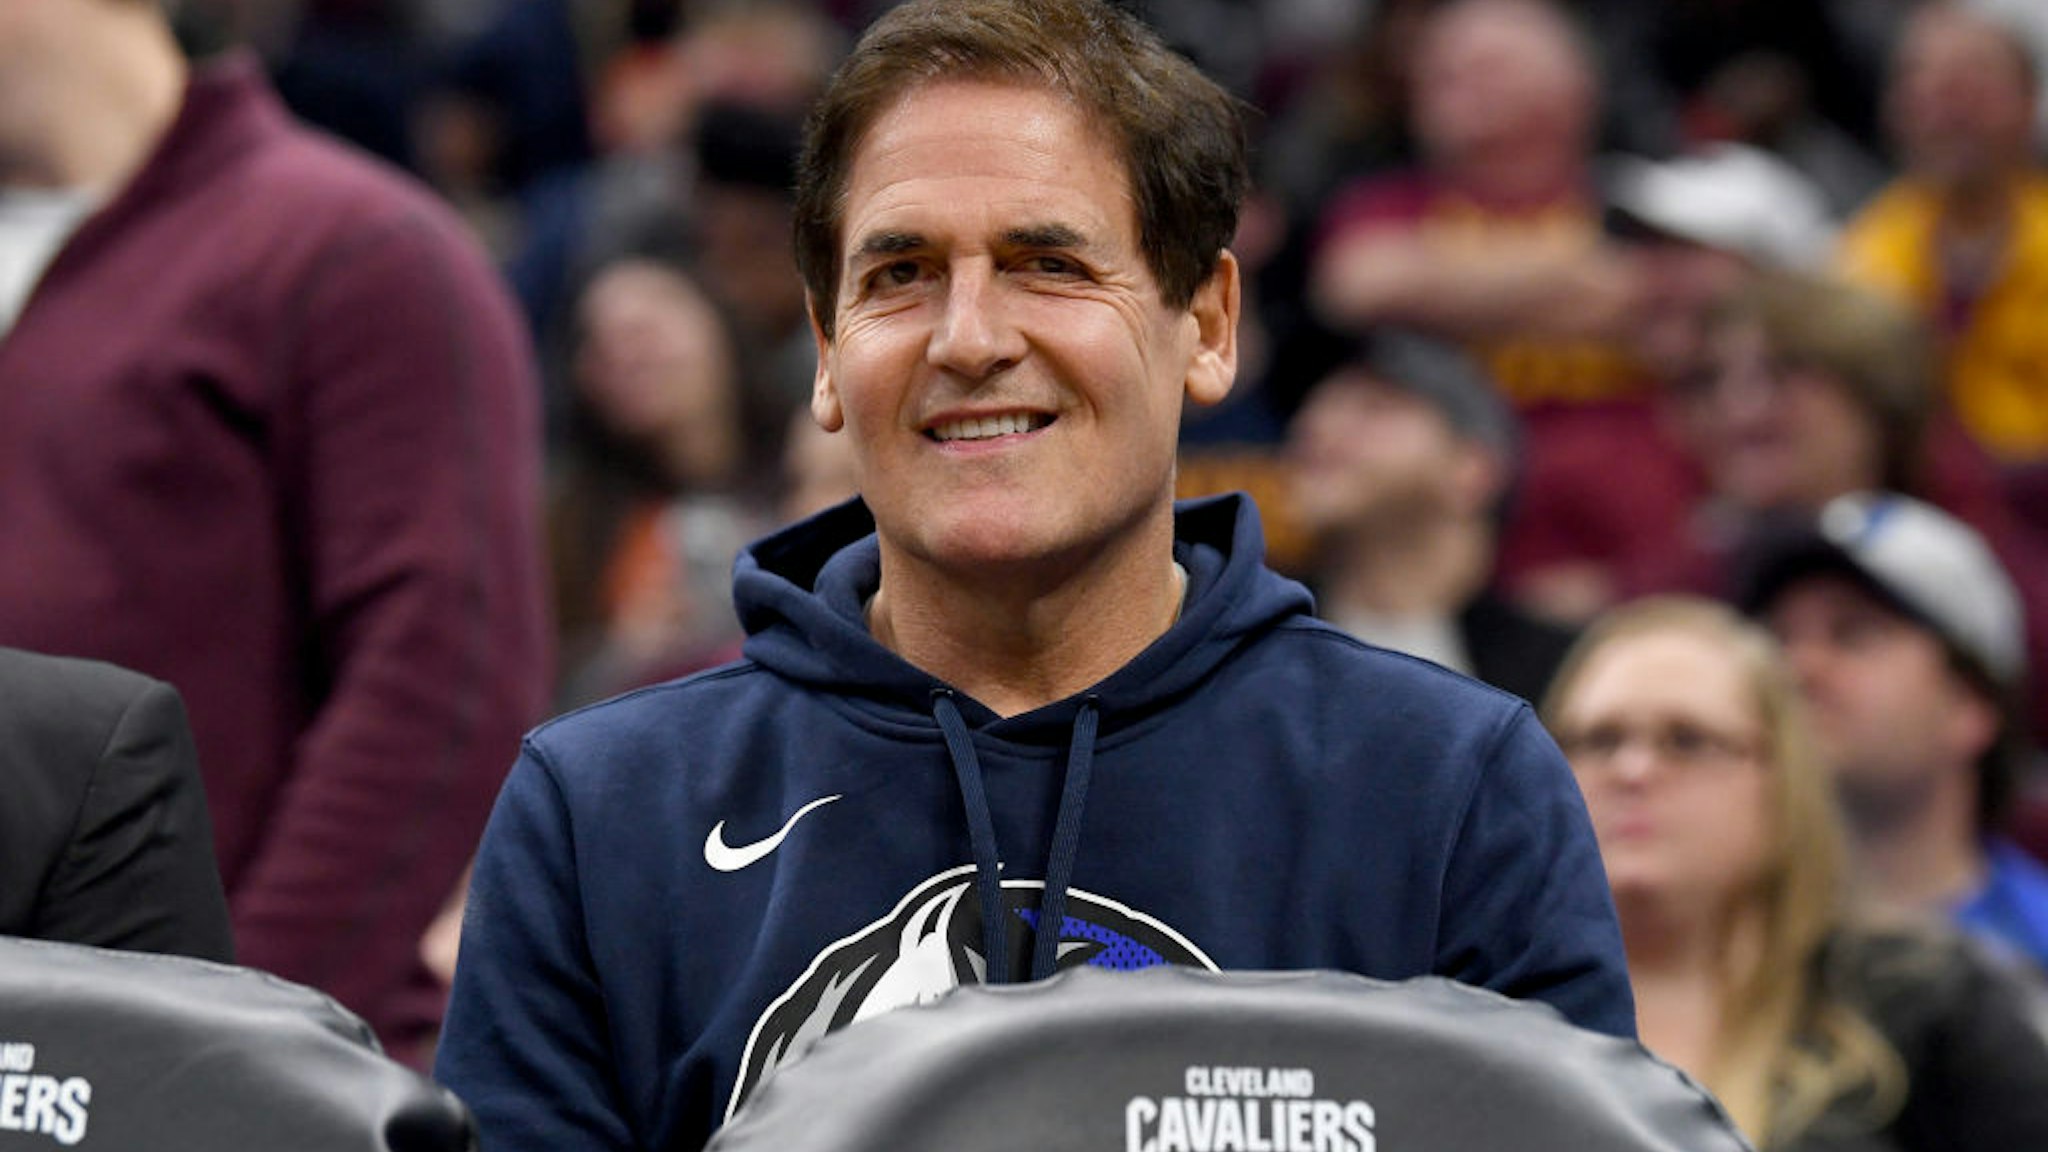 Mark Cuban owner of the Dallas Mavericks watches his team from the bench during the first half against the Cleveland Cavaliers at Rocket Mortgage Fieldhouse on November 03, 2019 in Cleveland, Ohio. NOTE TO USER: User expressly acknowledges and agrees that, by downloading and/or using this photograph, user is consenting to the terms and conditions of the Getty Images License Agreement.